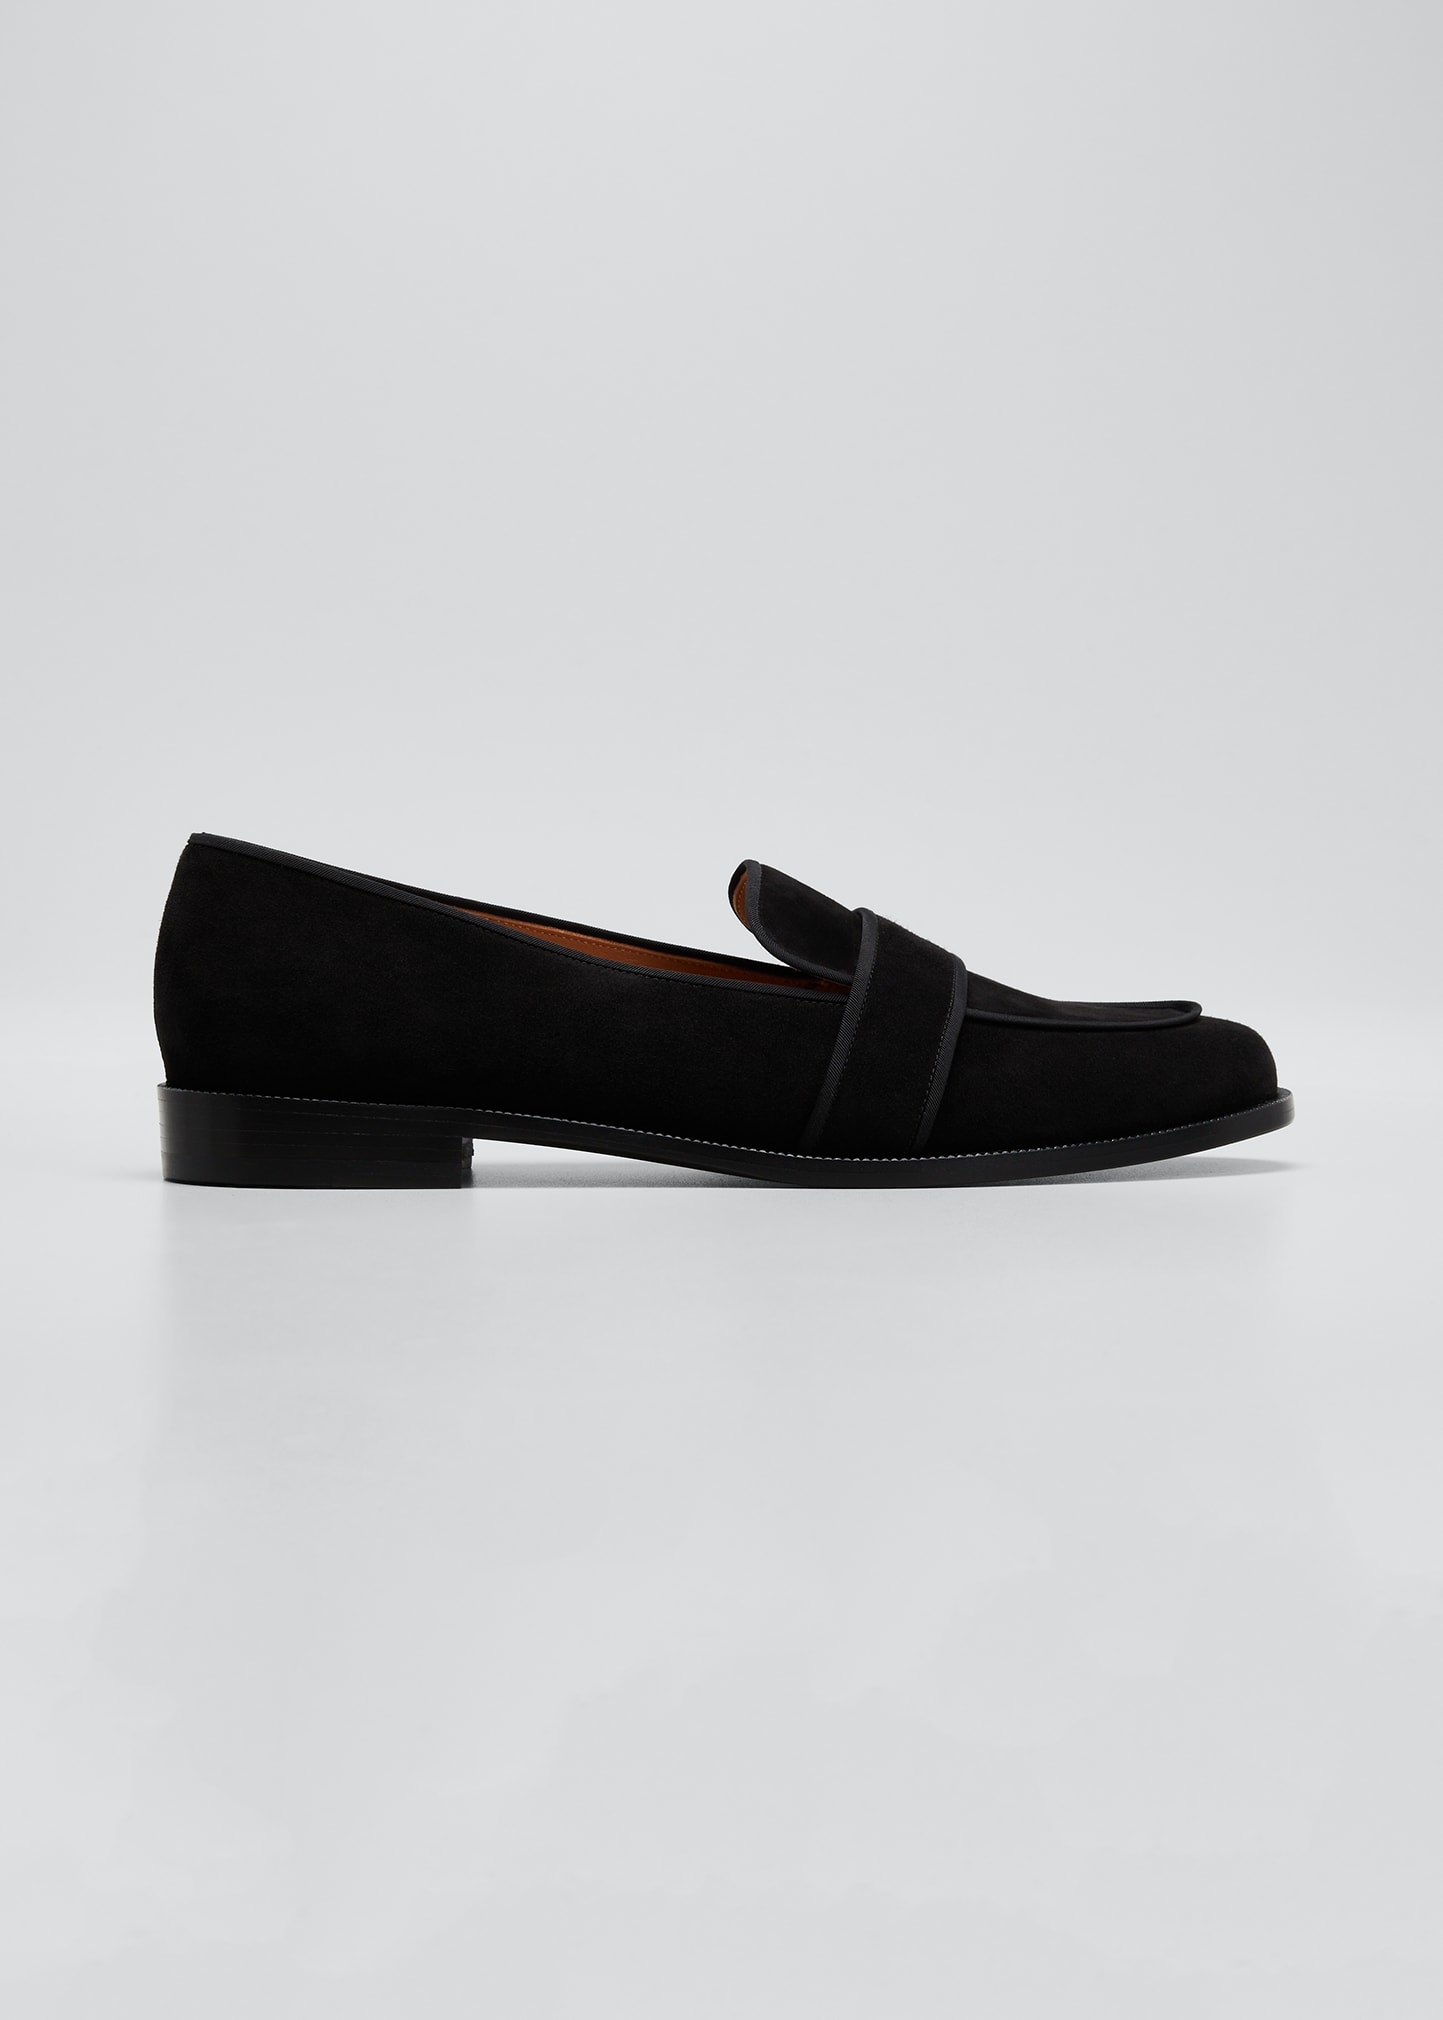 Martin Suede Mocassin Loafers